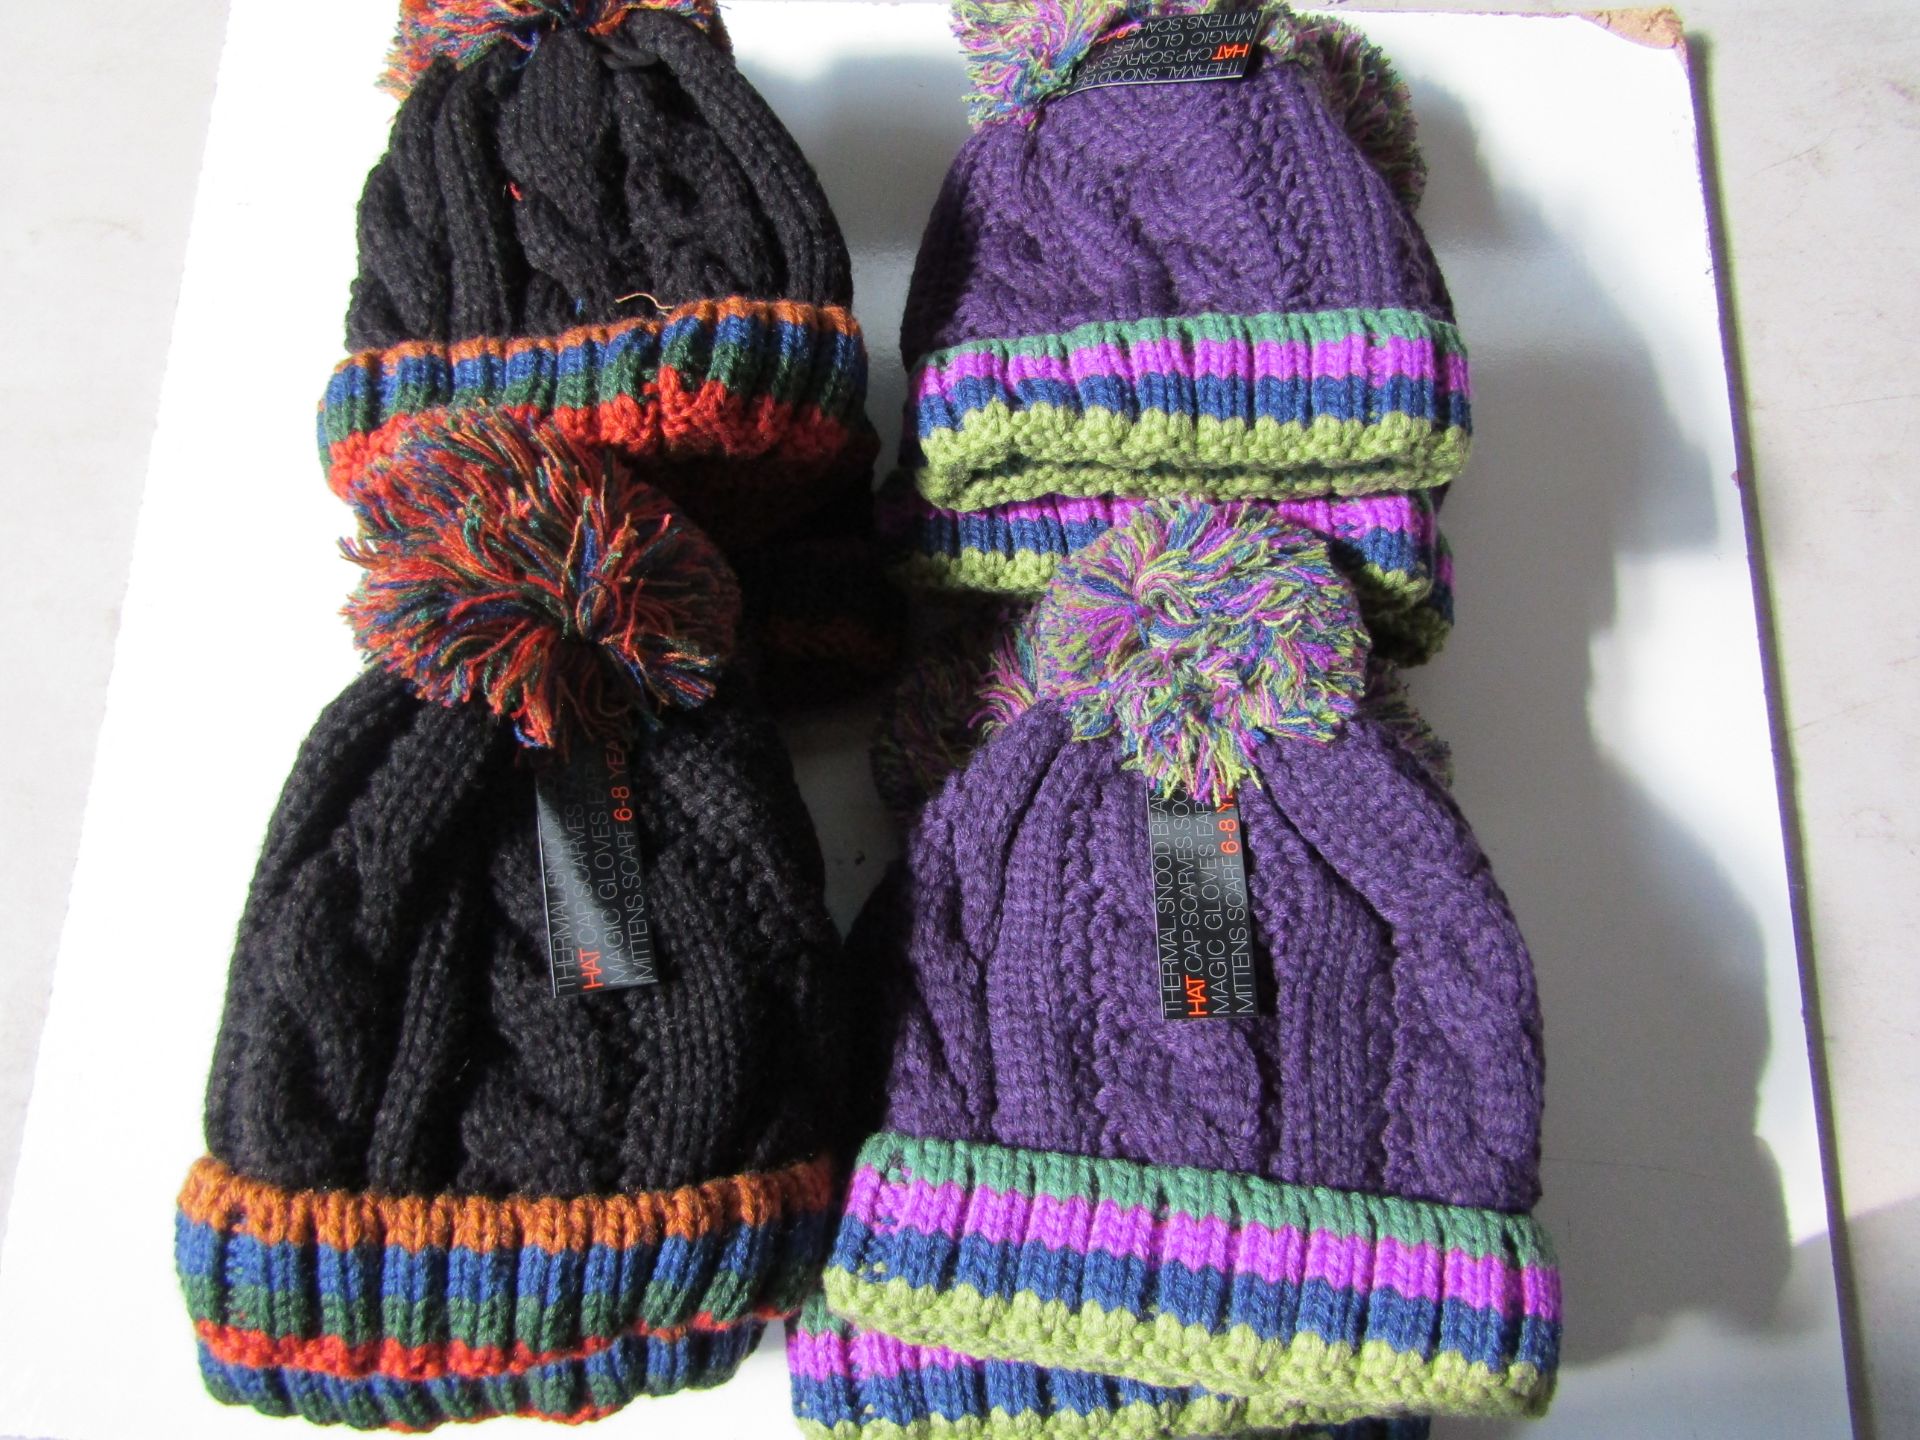 12 X Kids Chunky Bobble Hats 6 X 3-4 yrs & 6 X 7-10yrs All New With Tags